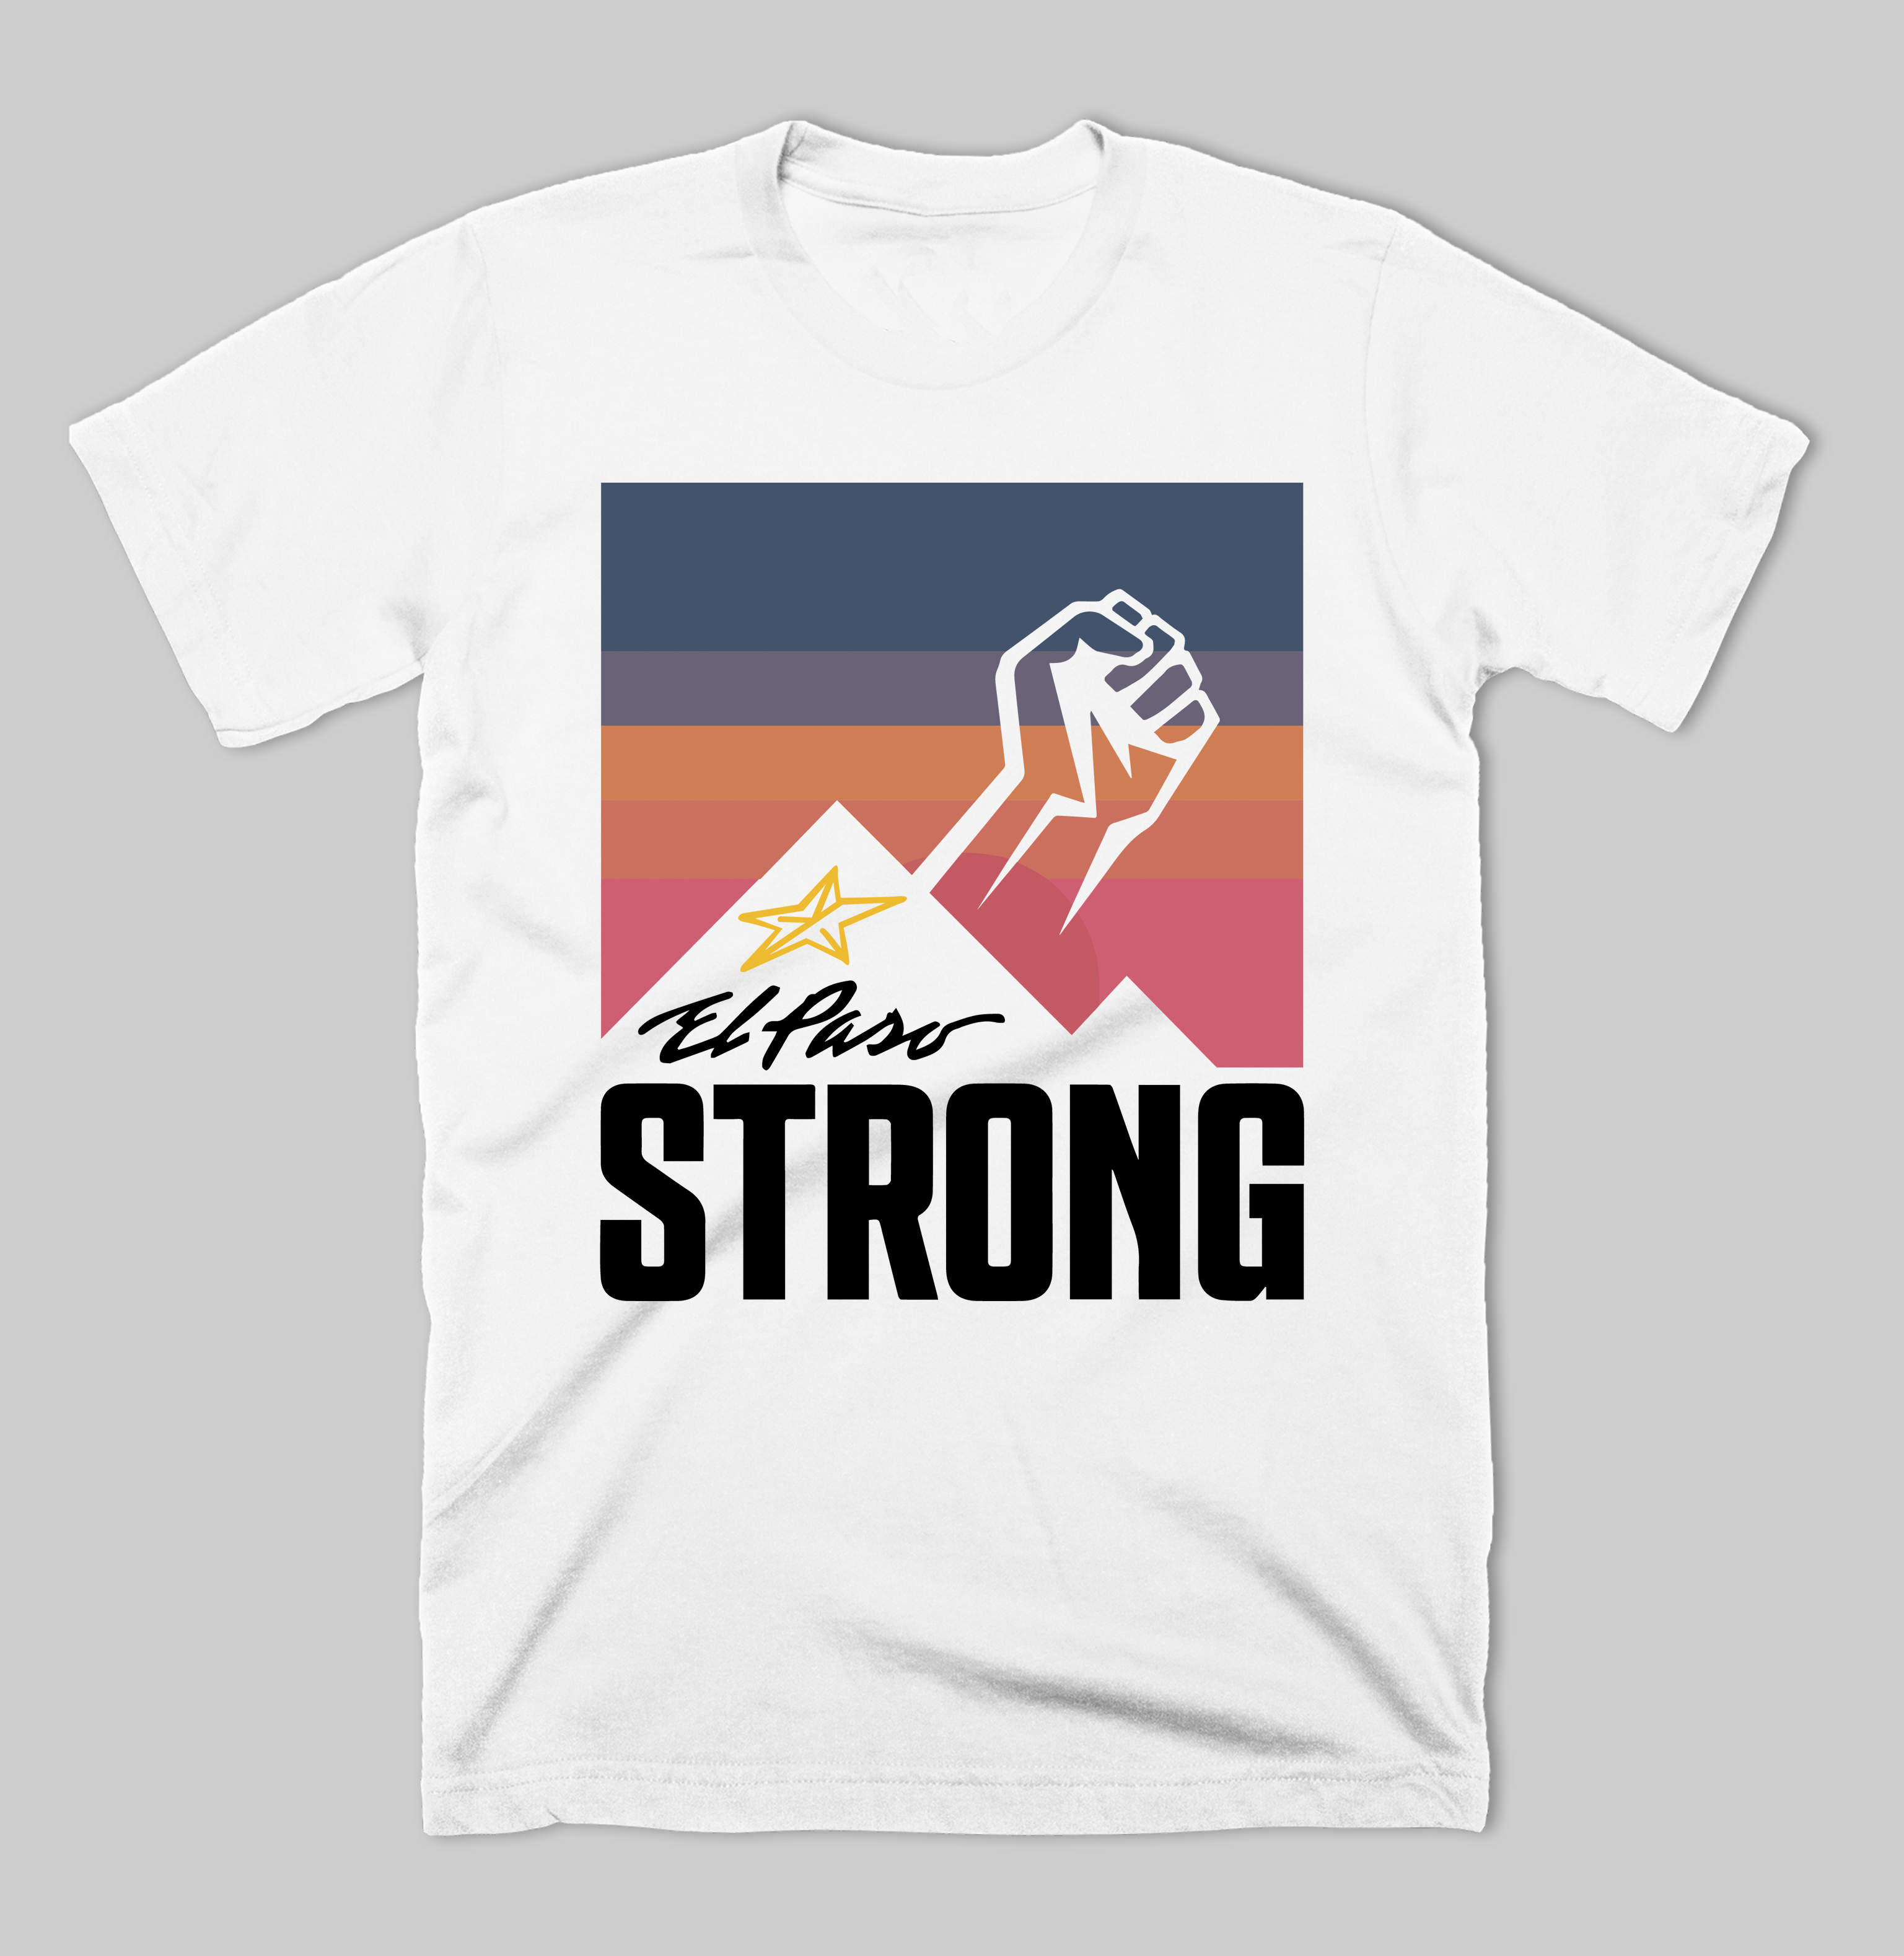 El Paso Strong "Sunset" T-shirt (White) by DC Design